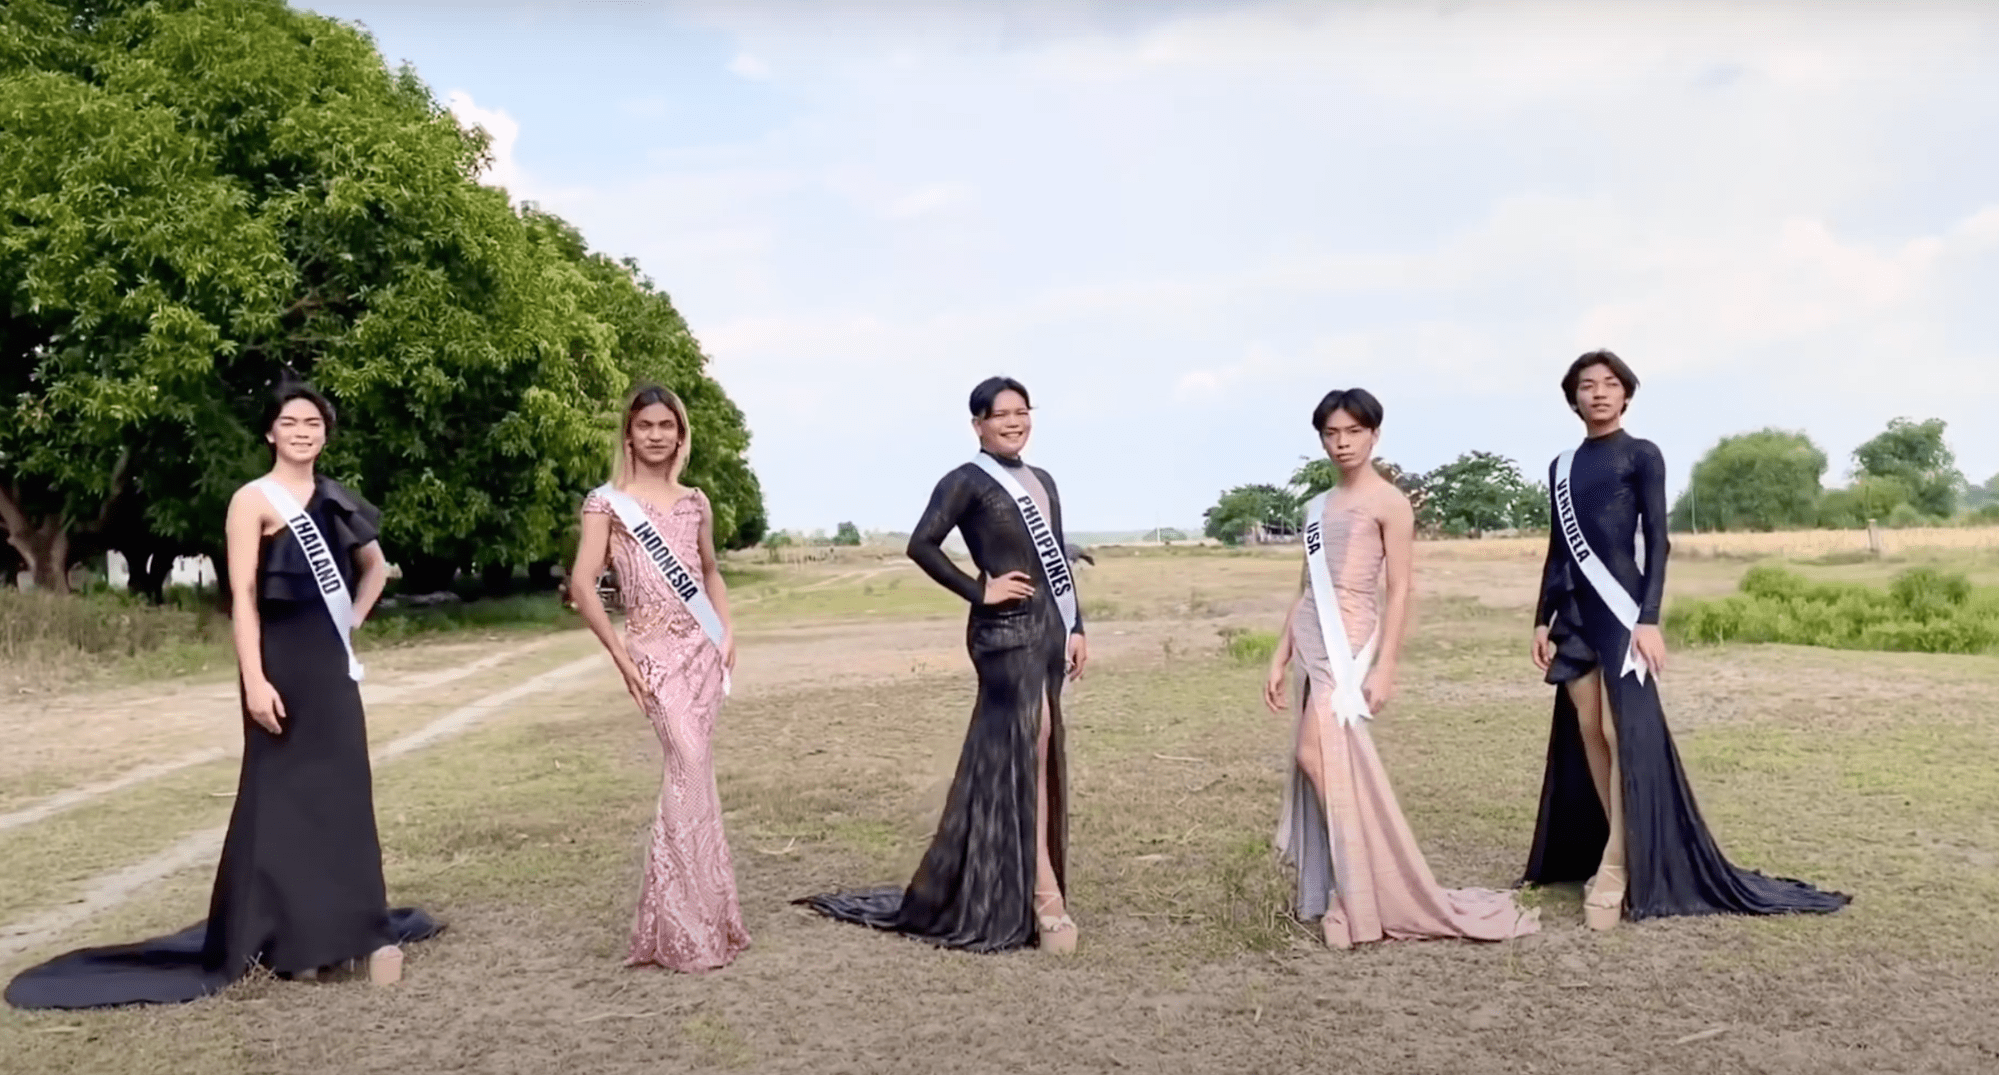 5 Filipinos in evening gowns